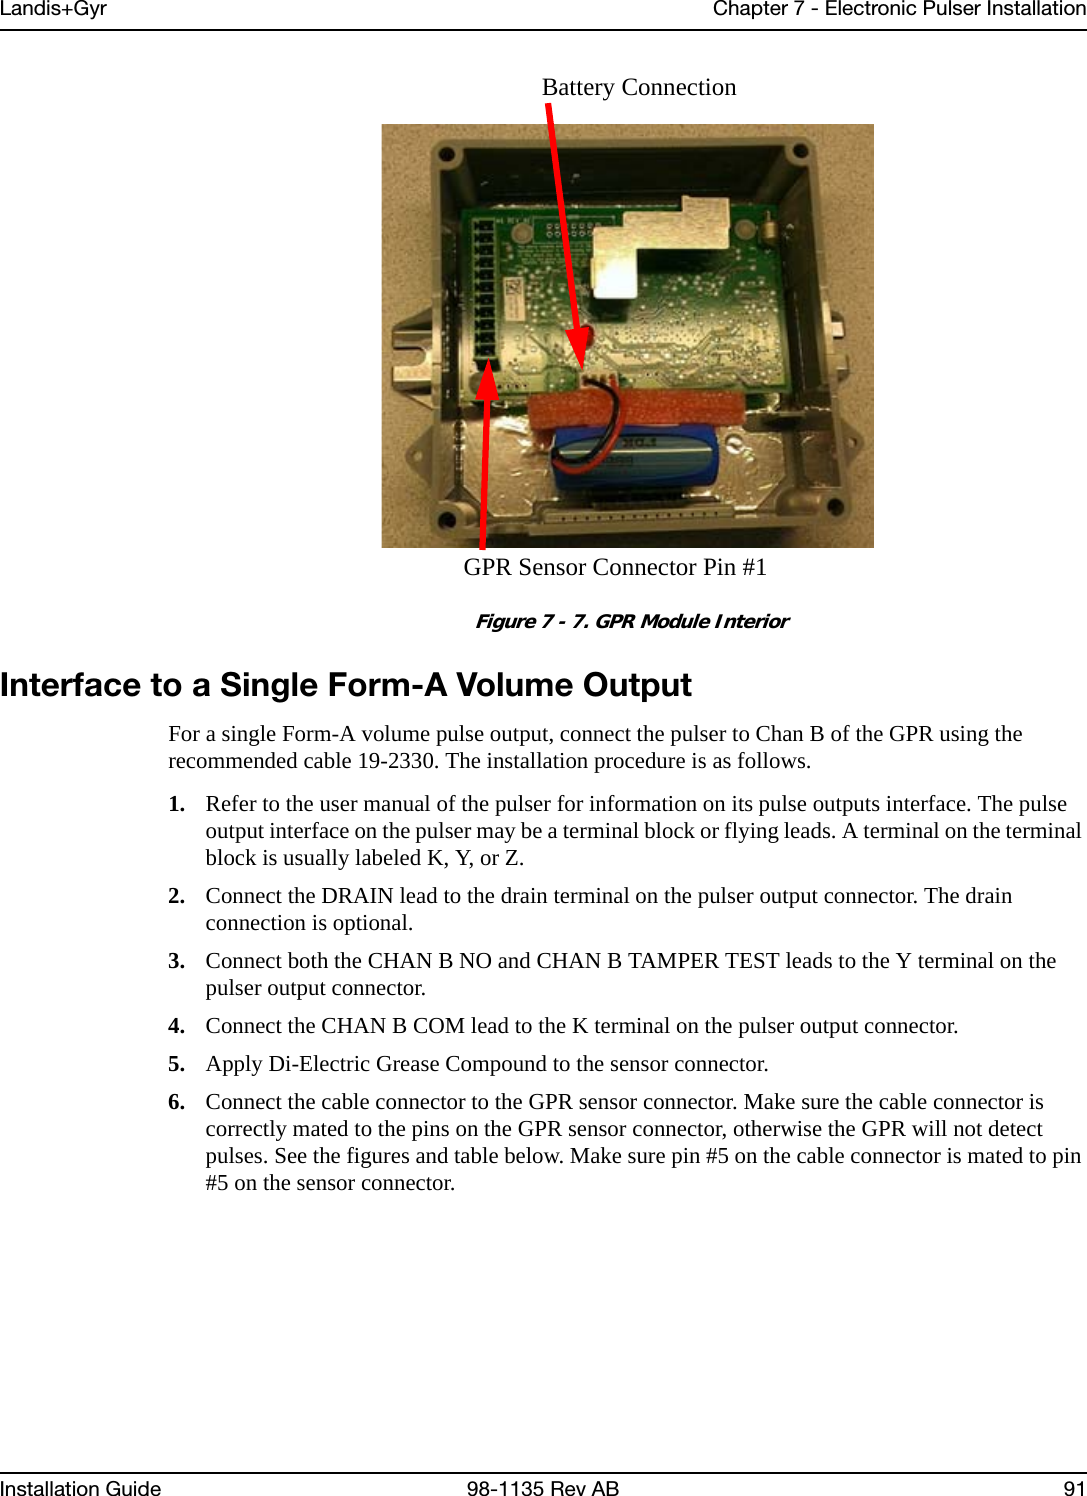 Landis+Gyr Chapter 7 - Electronic Pulser InstallationInstallation Guide 98-1135 Rev AB 91 Figure 7 - 7. GPR Module InteriorInterface to a Single Form-A Volume OutputFor a single Form-A volume pulse output, connect the pulser to Chan B of the GPR using the recommended cable 19-2330. The installation procedure is as follows.1. Refer to the user manual of the pulser for information on its pulse outputs interface. The pulse output interface on the pulser may be a terminal block or flying leads. A terminal on the terminal block is usually labeled K, Y, or Z.2. Connect the DRAIN lead to the drain terminal on the pulser output connector. The drain connection is optional.3. Connect both the CHAN B NO and CHAN B TAMPER TEST leads to the Y terminal on the pulser output connector.4. Connect the CHAN B COM lead to the K terminal on the pulser output connector.5. Apply Di-Electric Grease Compound to the sensor connector.6. Connect the cable connector to the GPR sensor connector. Make sure the cable connector is correctly mated to the pins on the GPR sensor connector, otherwise the GPR will not detect pulses. See the figures and table below. Make sure pin #5 on the cable connector is mated to pin #5 on the sensor connector.Battery ConnectionGPR Sensor Connector Pin #1